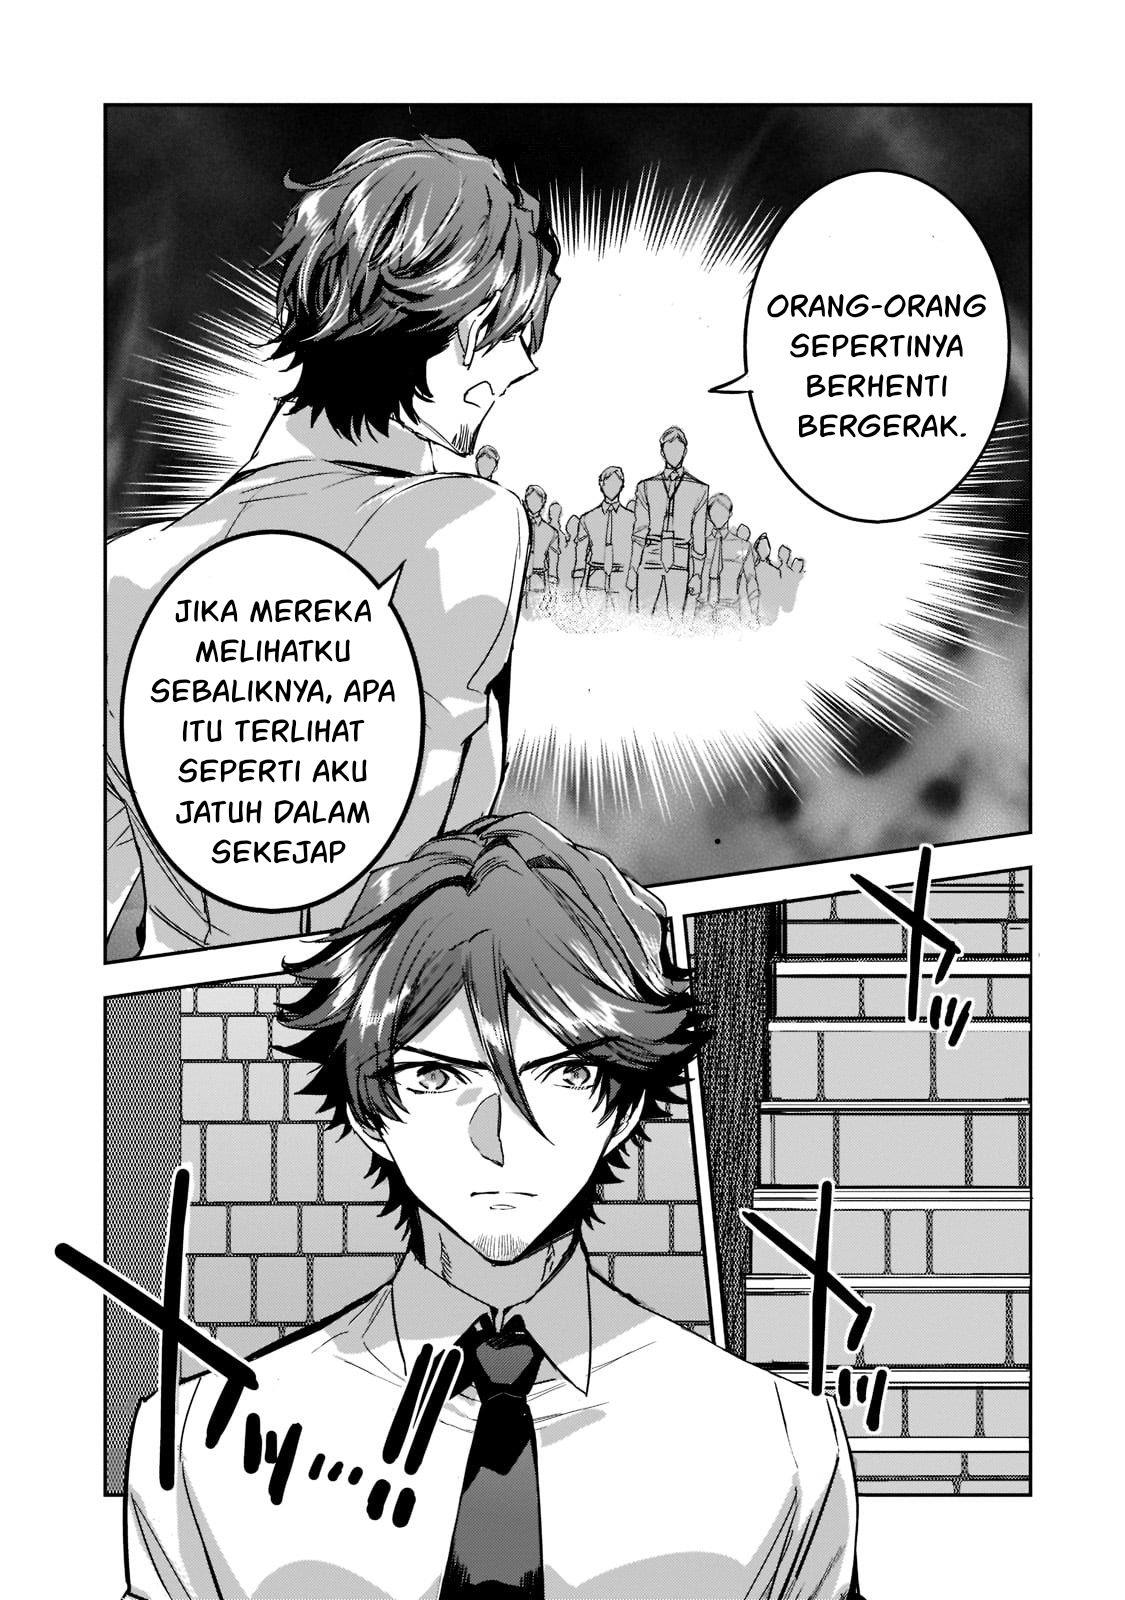 Dungeon Busters Chapter 8